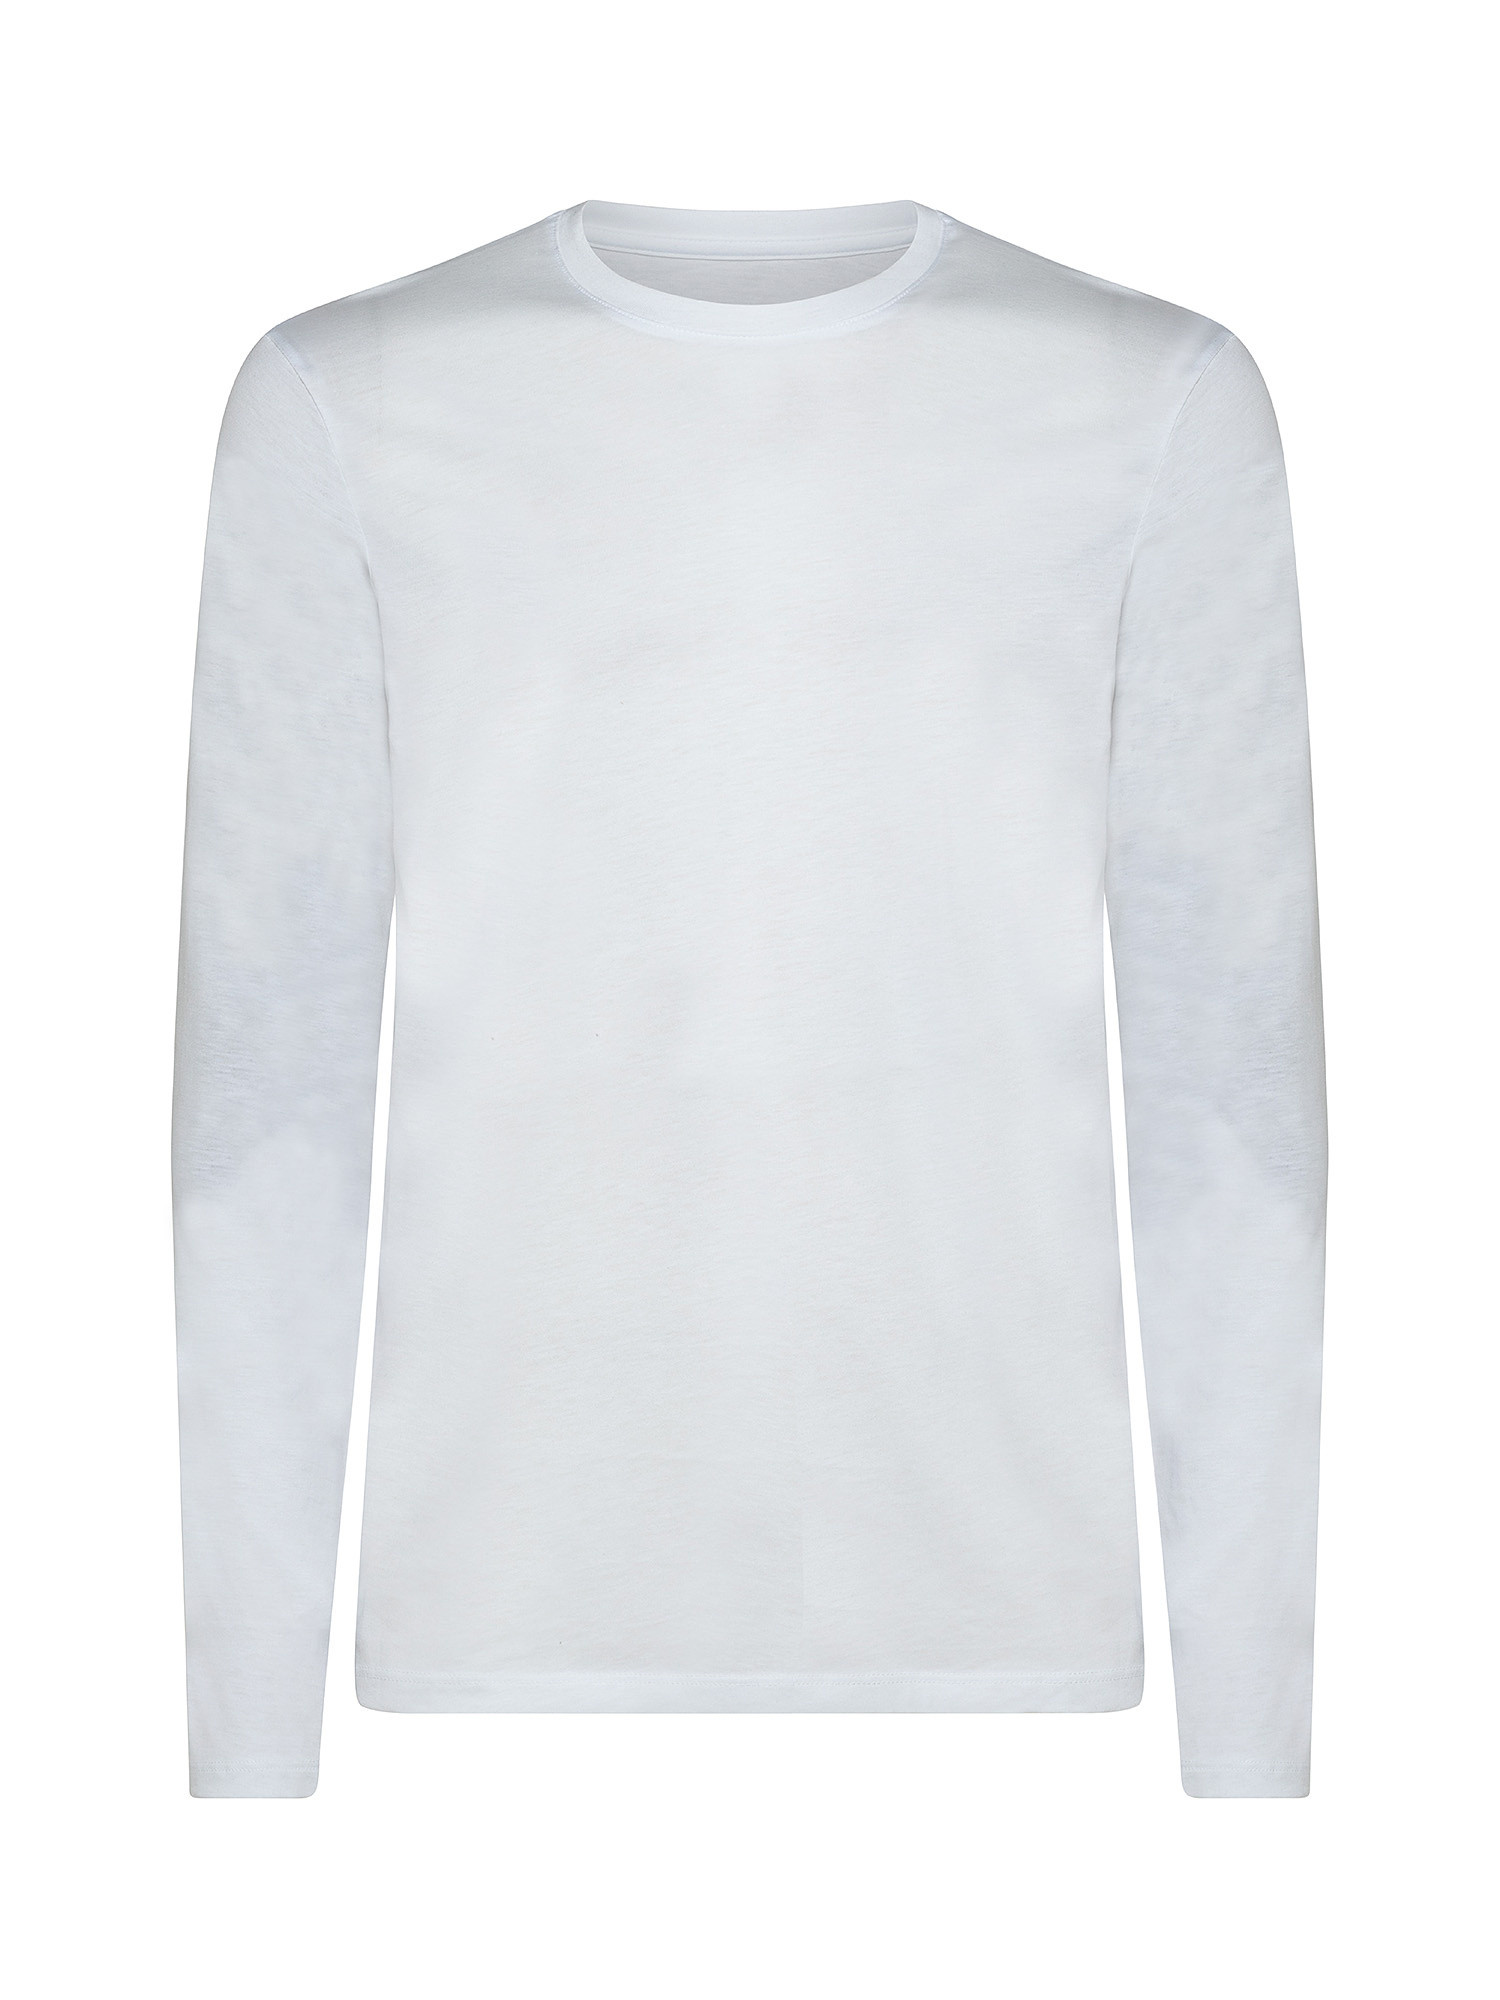 Sweater, White, large image number 0